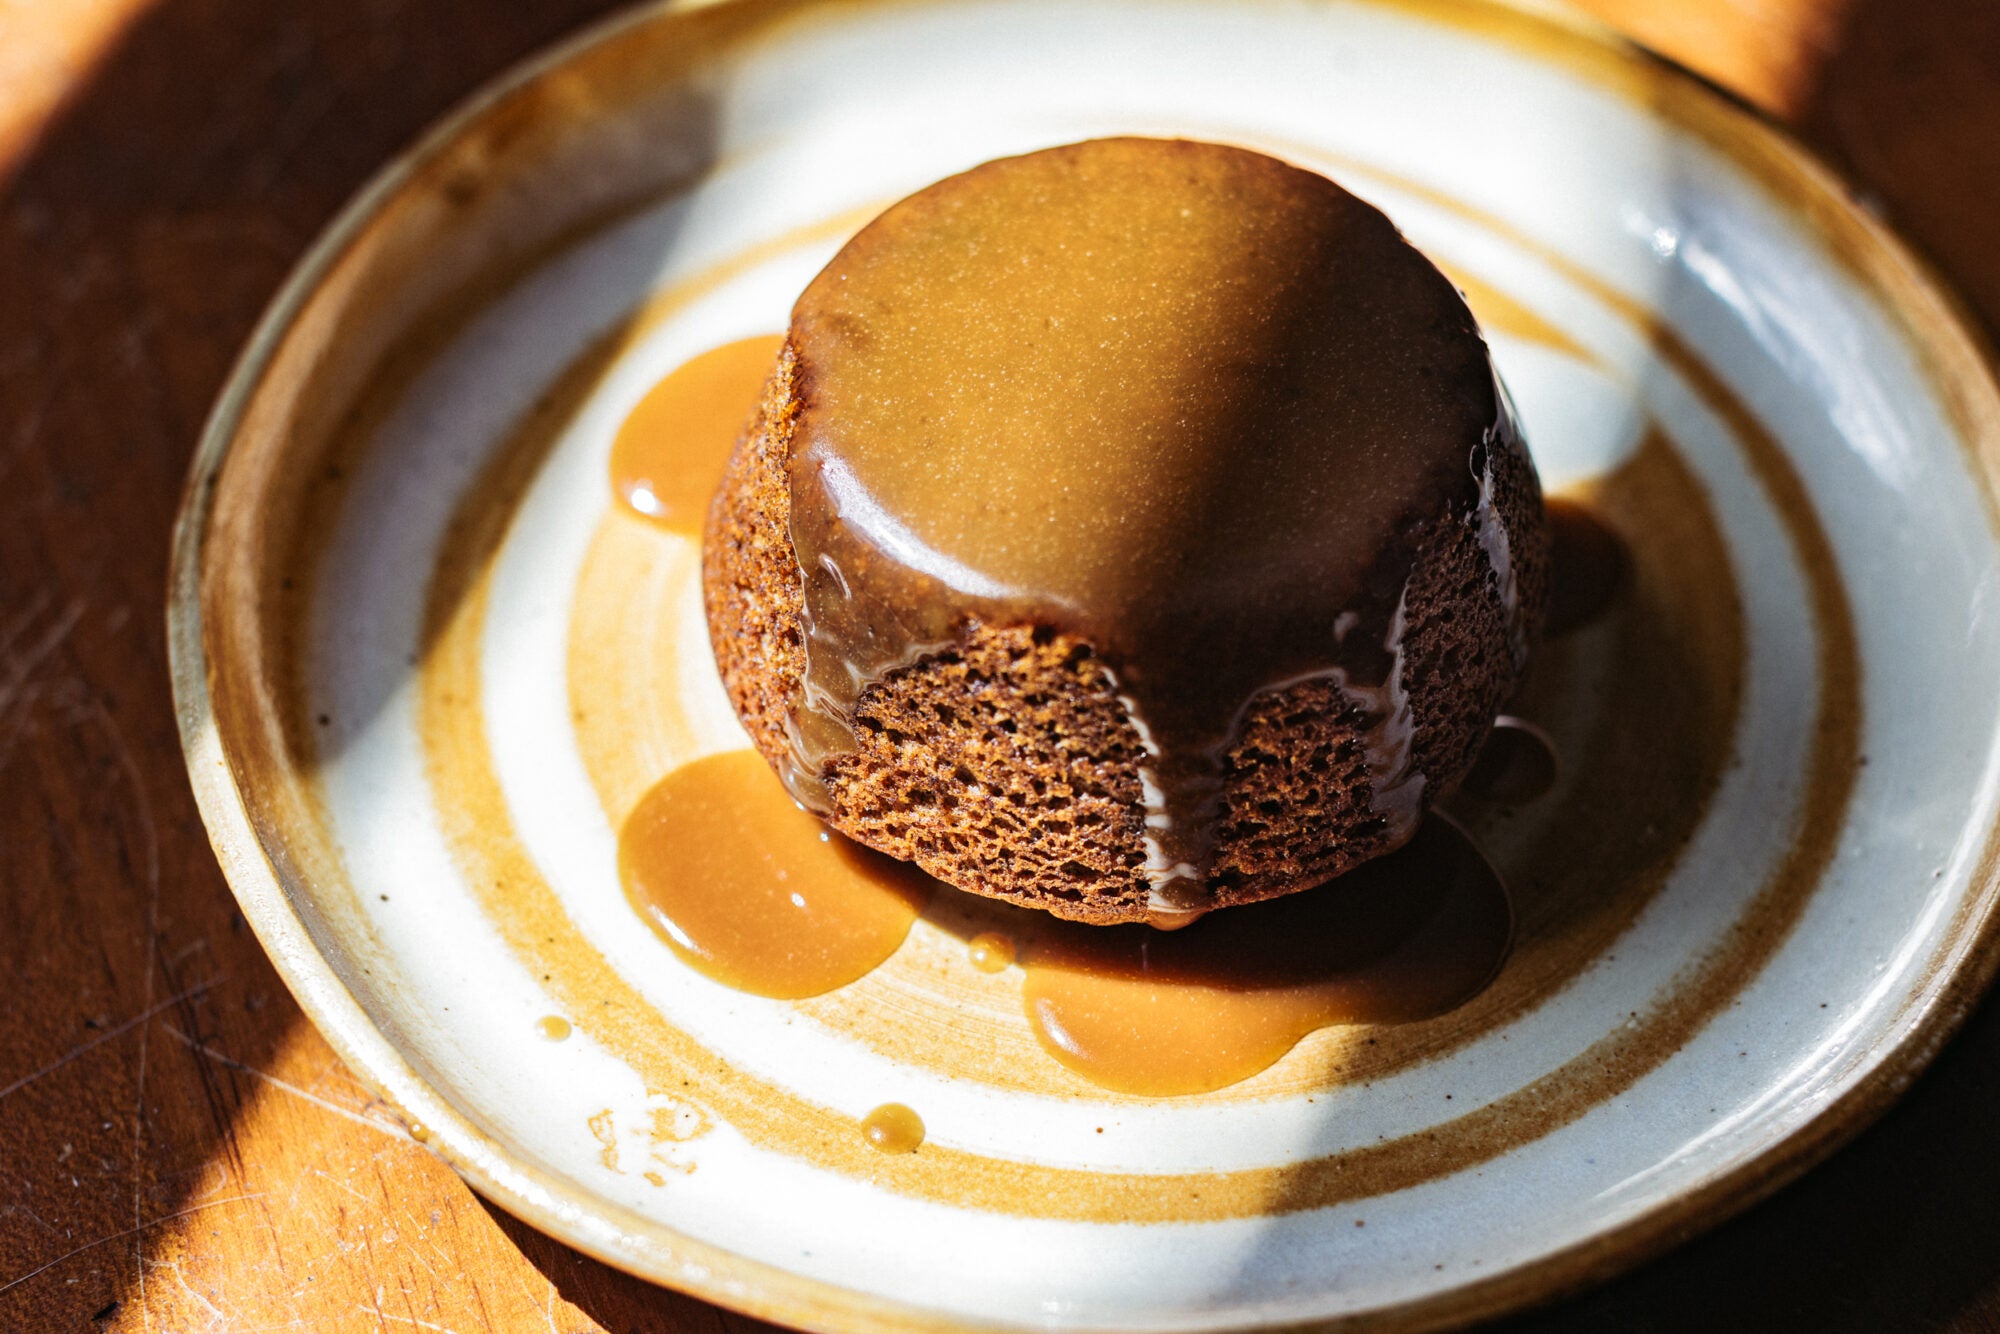 ARTICLE-Sticky Pudding With Butterscotch-0326